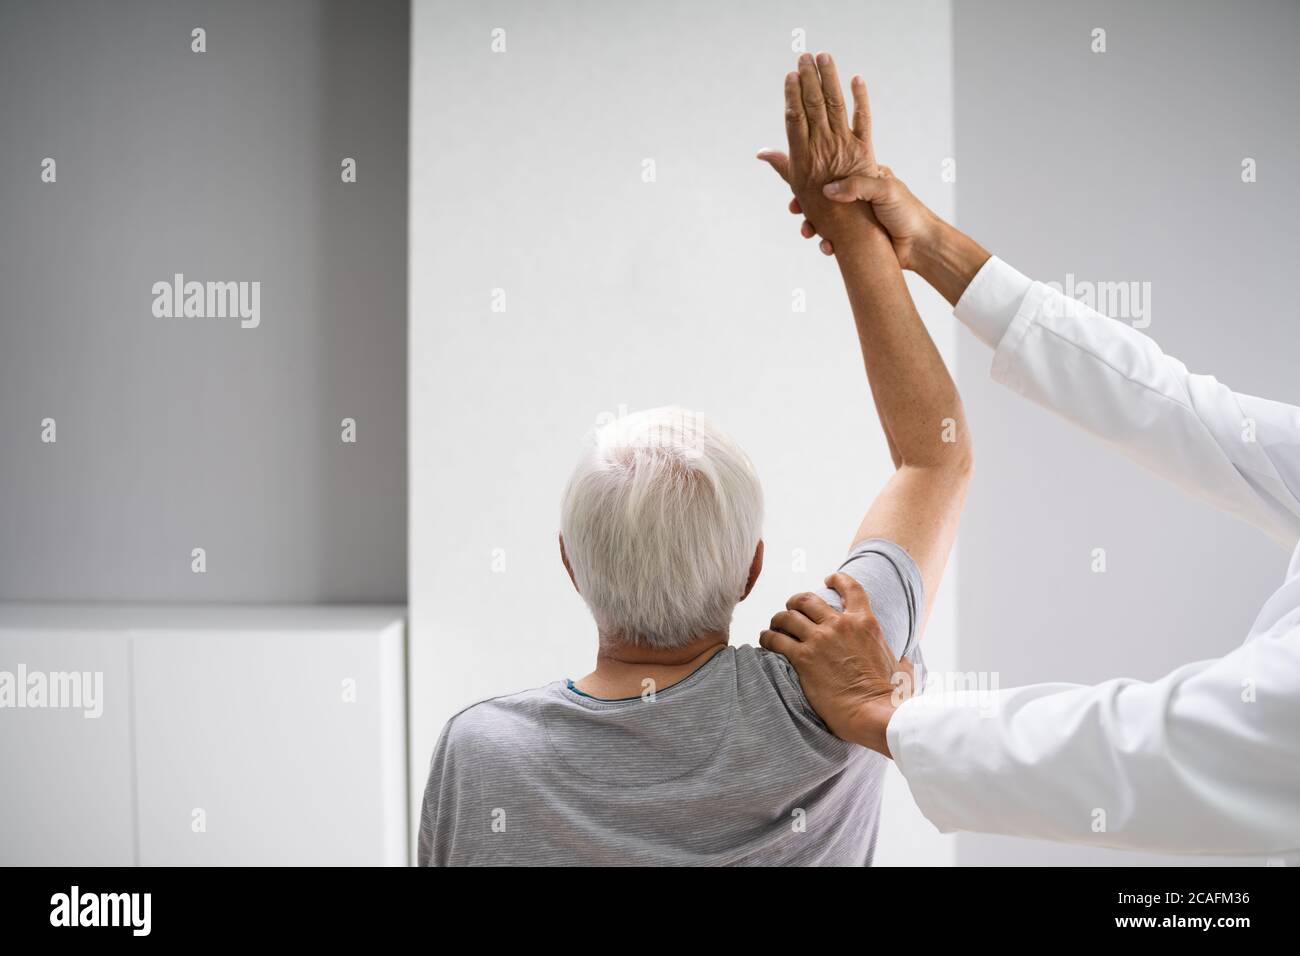 Physical Rehabilitation Therapy Exercise After Shoulder Injury Stock Photo